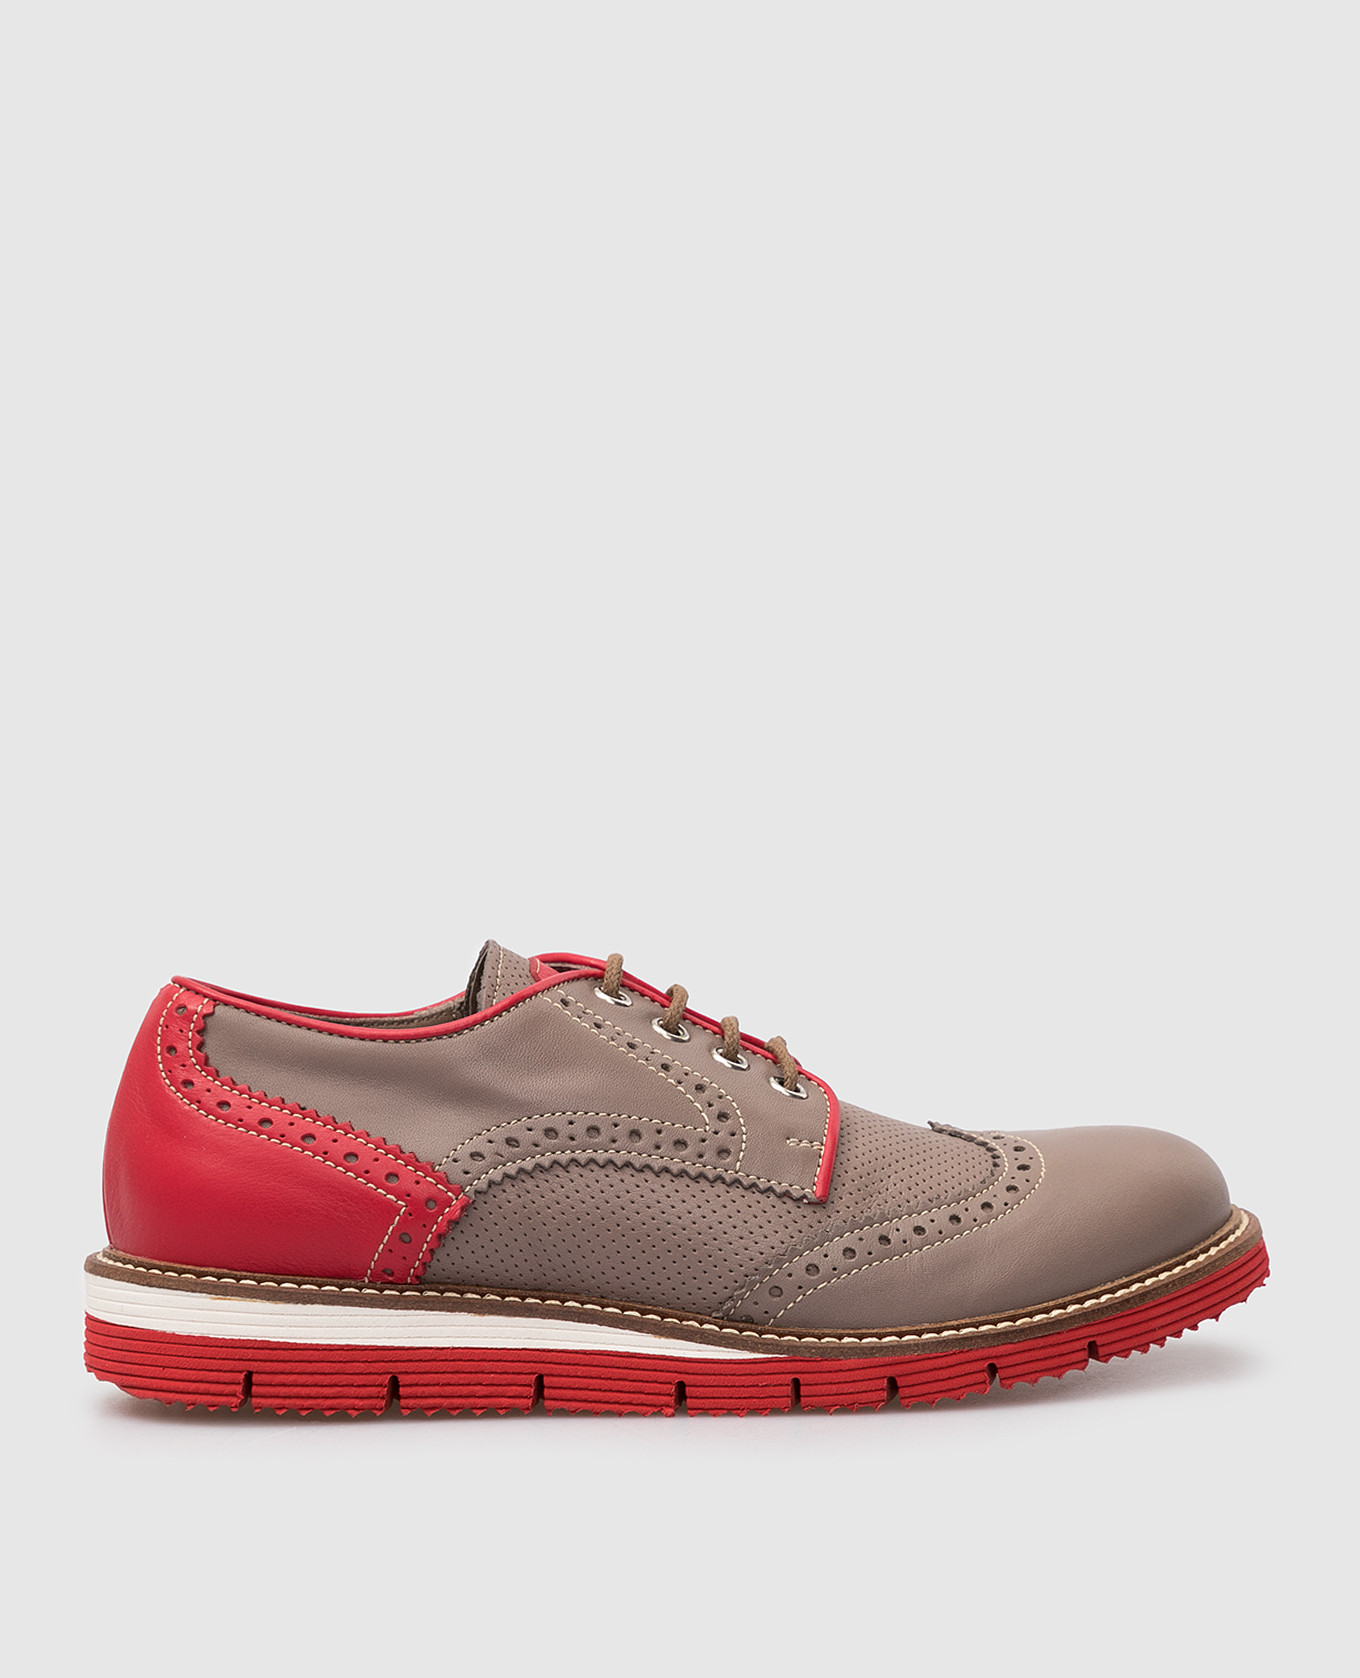 Children's leather brogues with contrast inserts